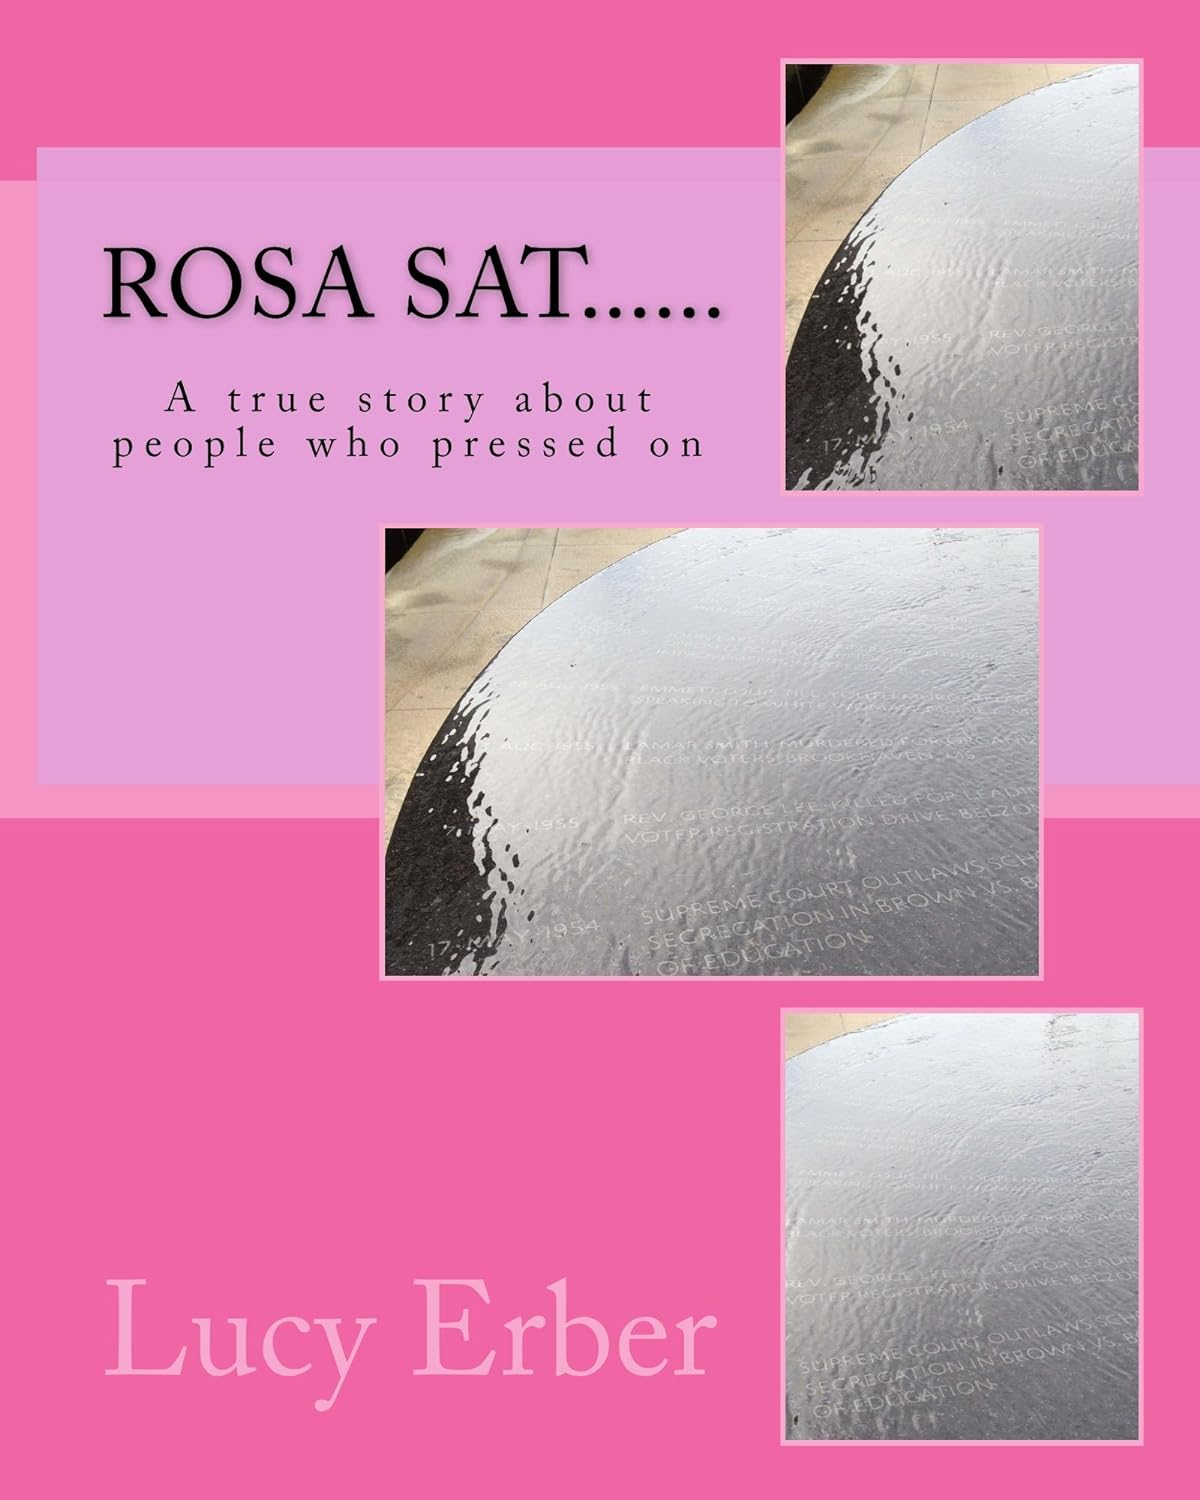 Rosa Sat: A true story about people who pressed on